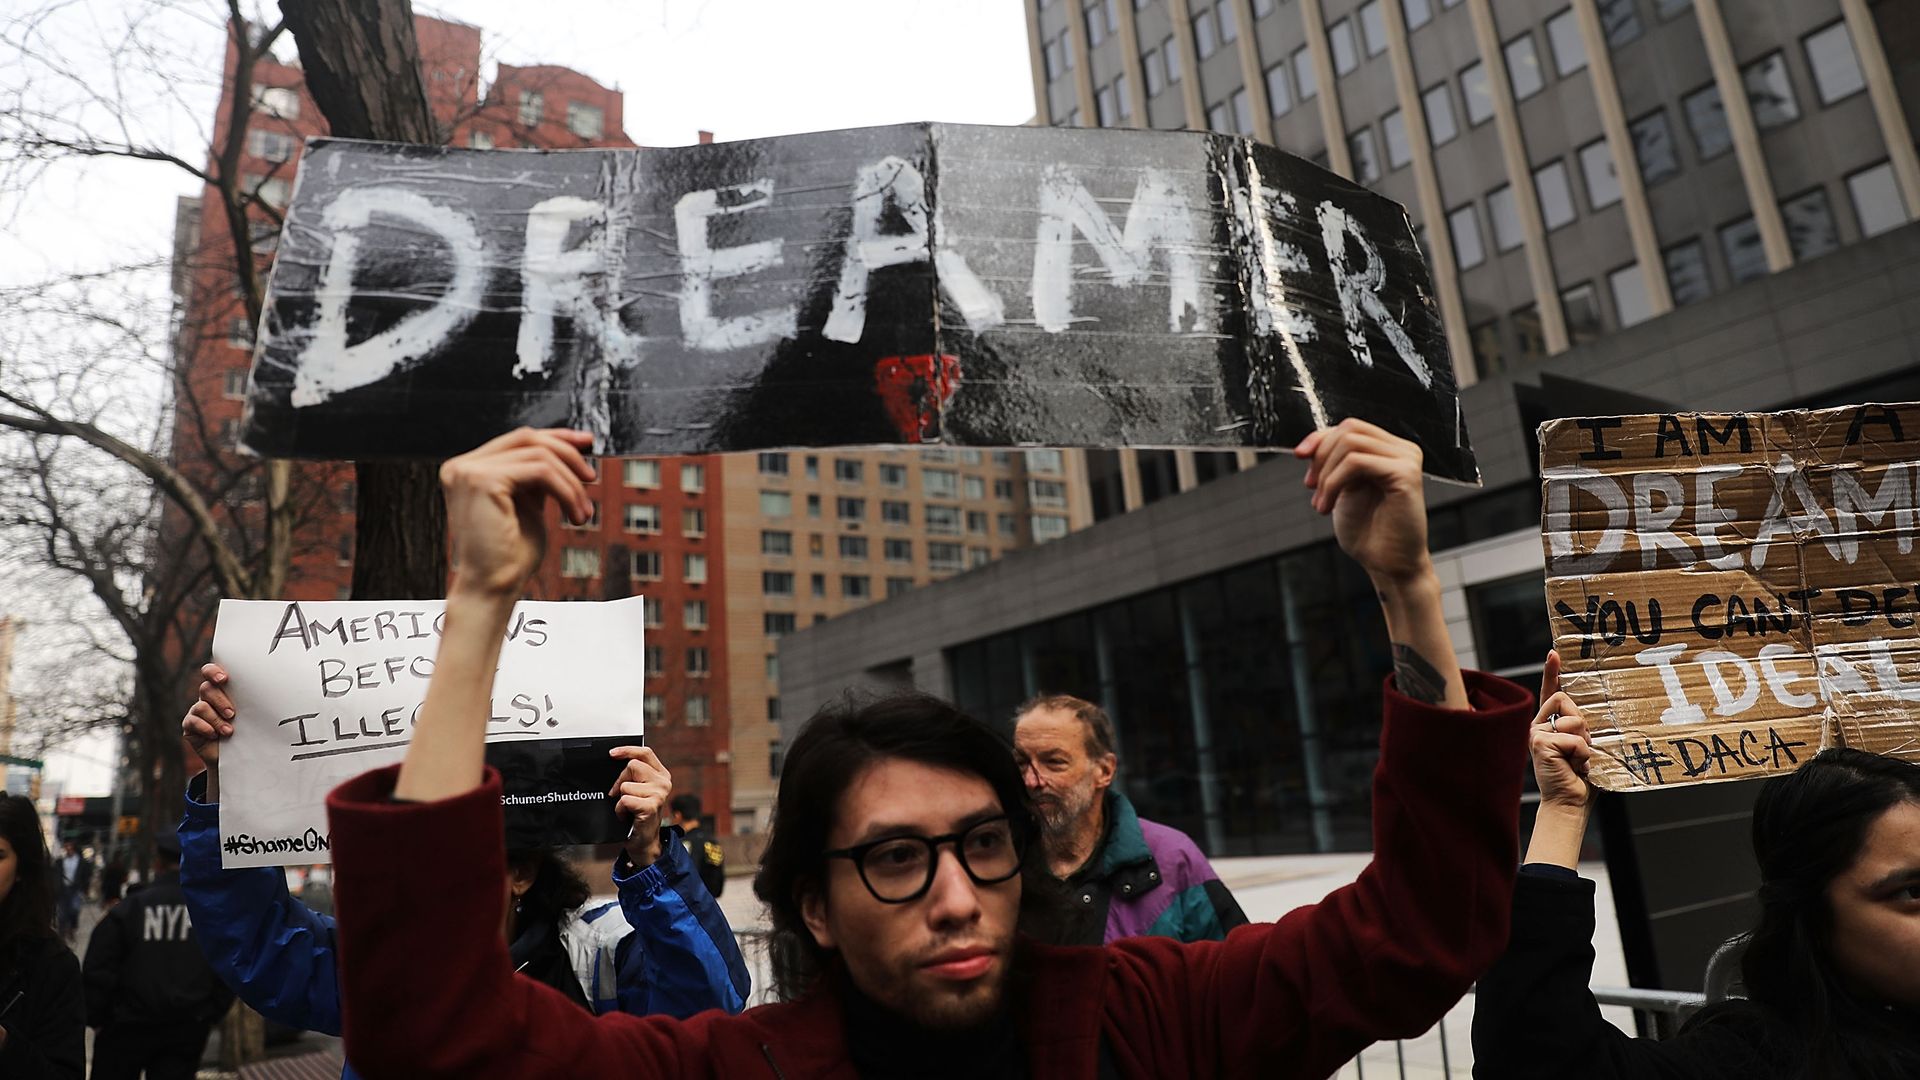 Demonstrator at a pro-immigration rally in New York City.